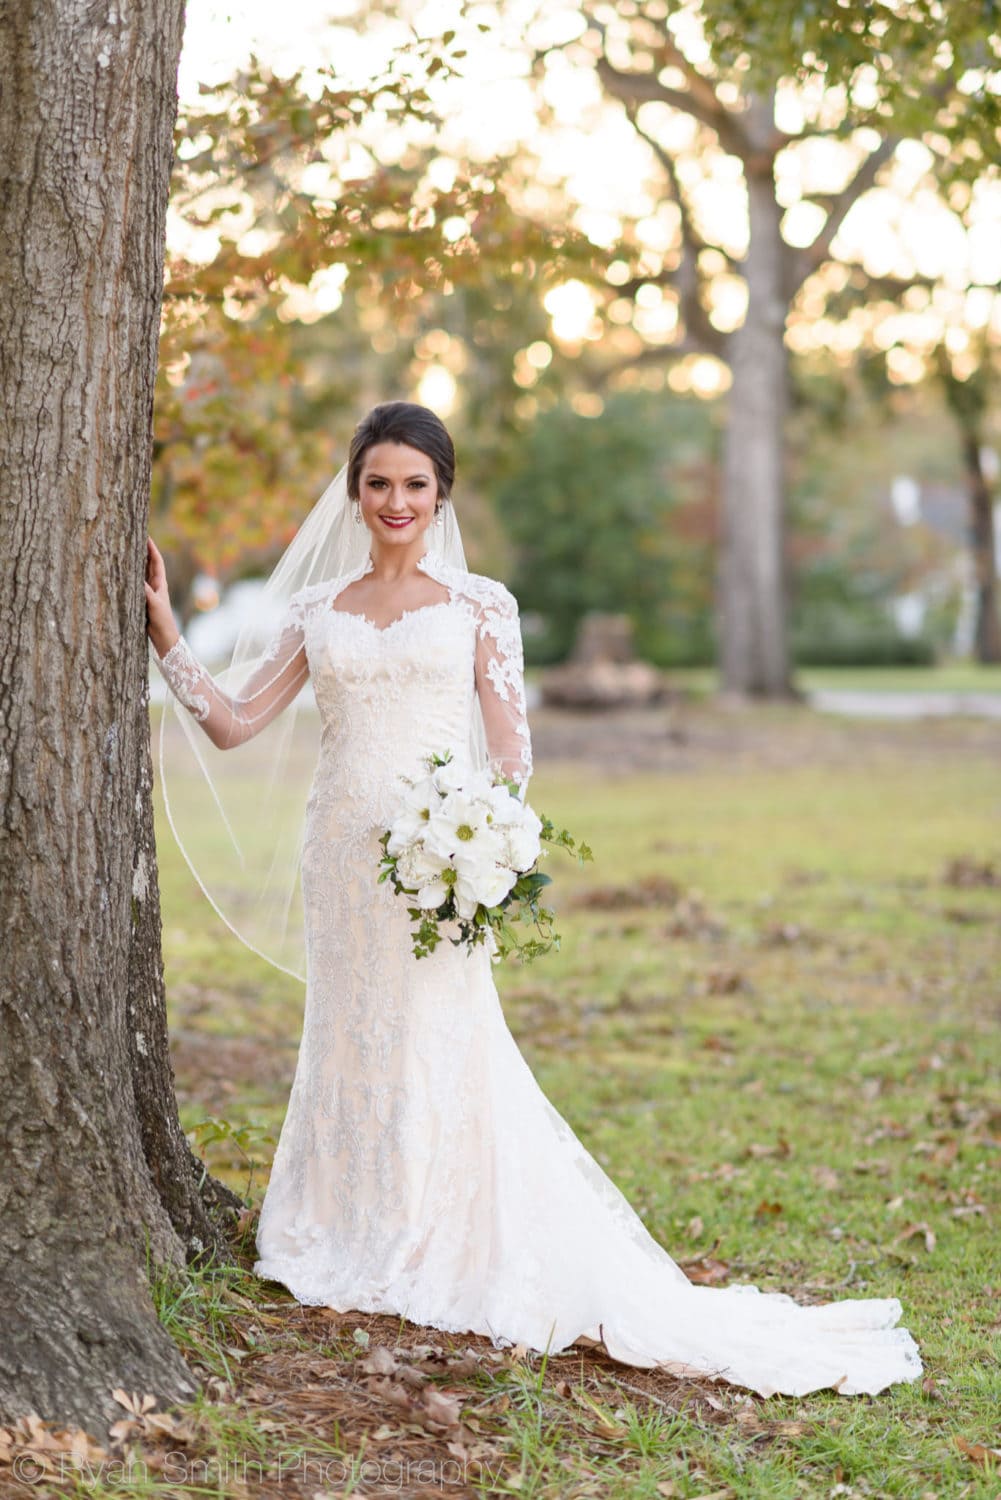 Bridal portraits backlit by sunlight coming through the trees - Rosewood Manor, Marion